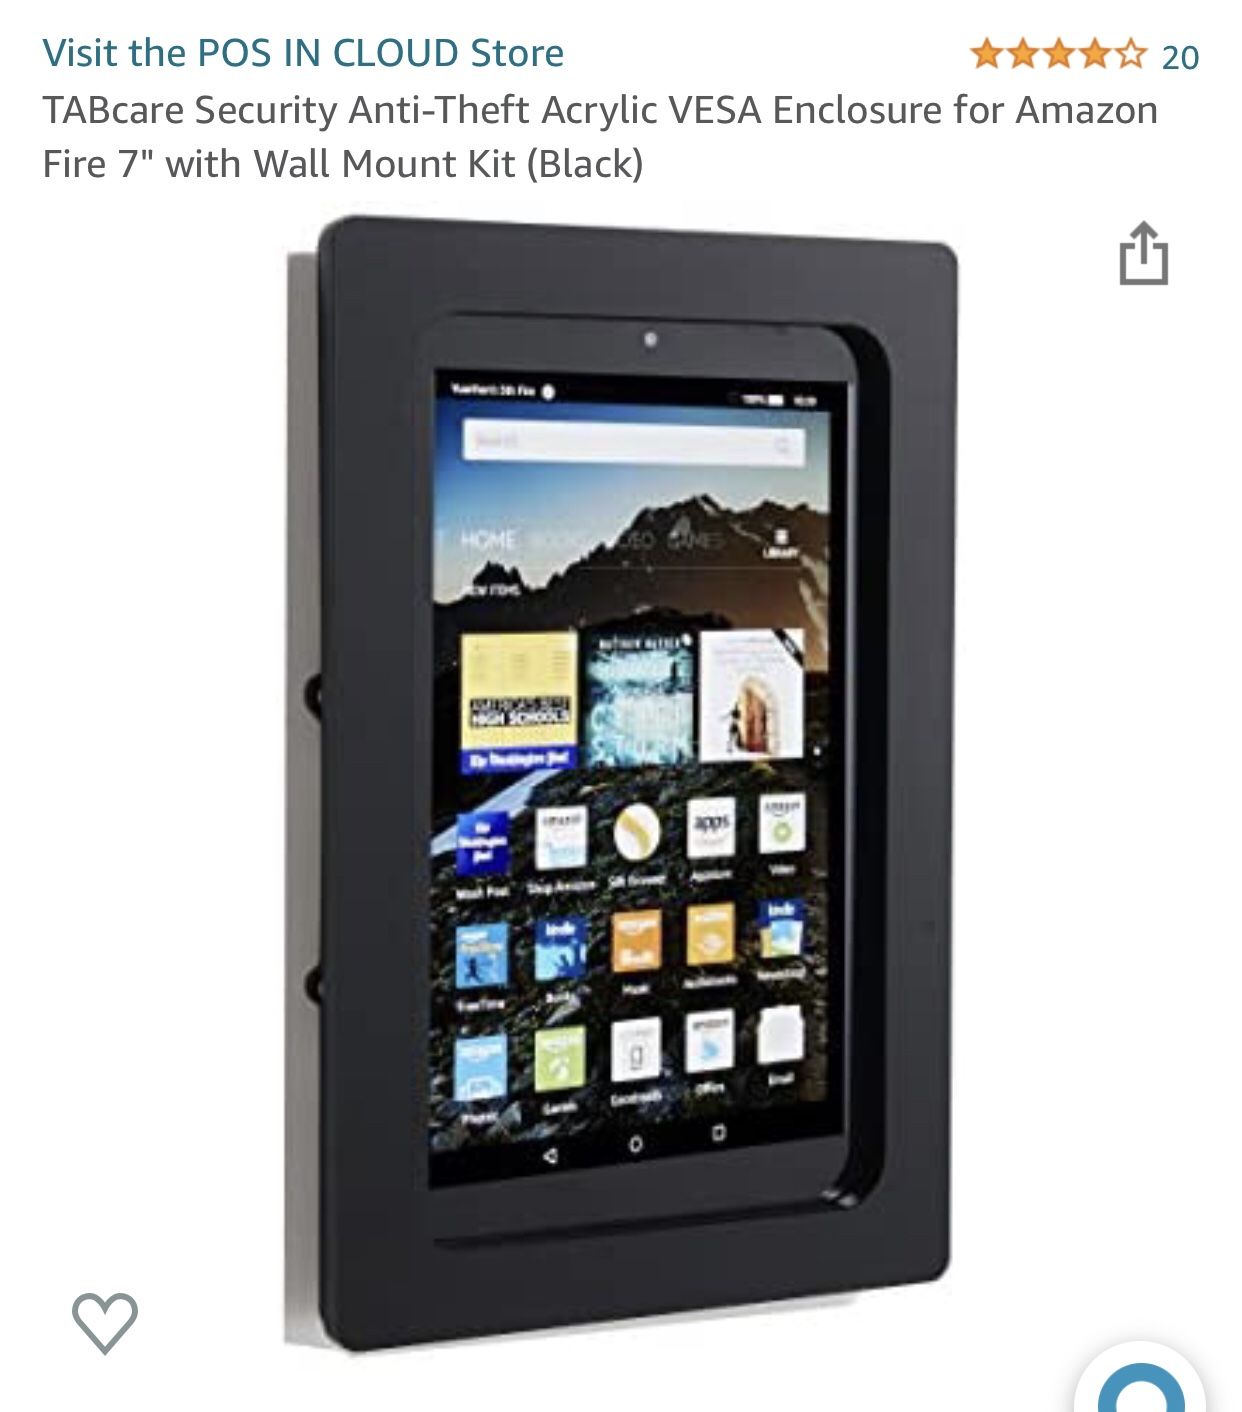 Security Anti-Theft Wall Mount Kit for Amazon Fire 7” Tablet.